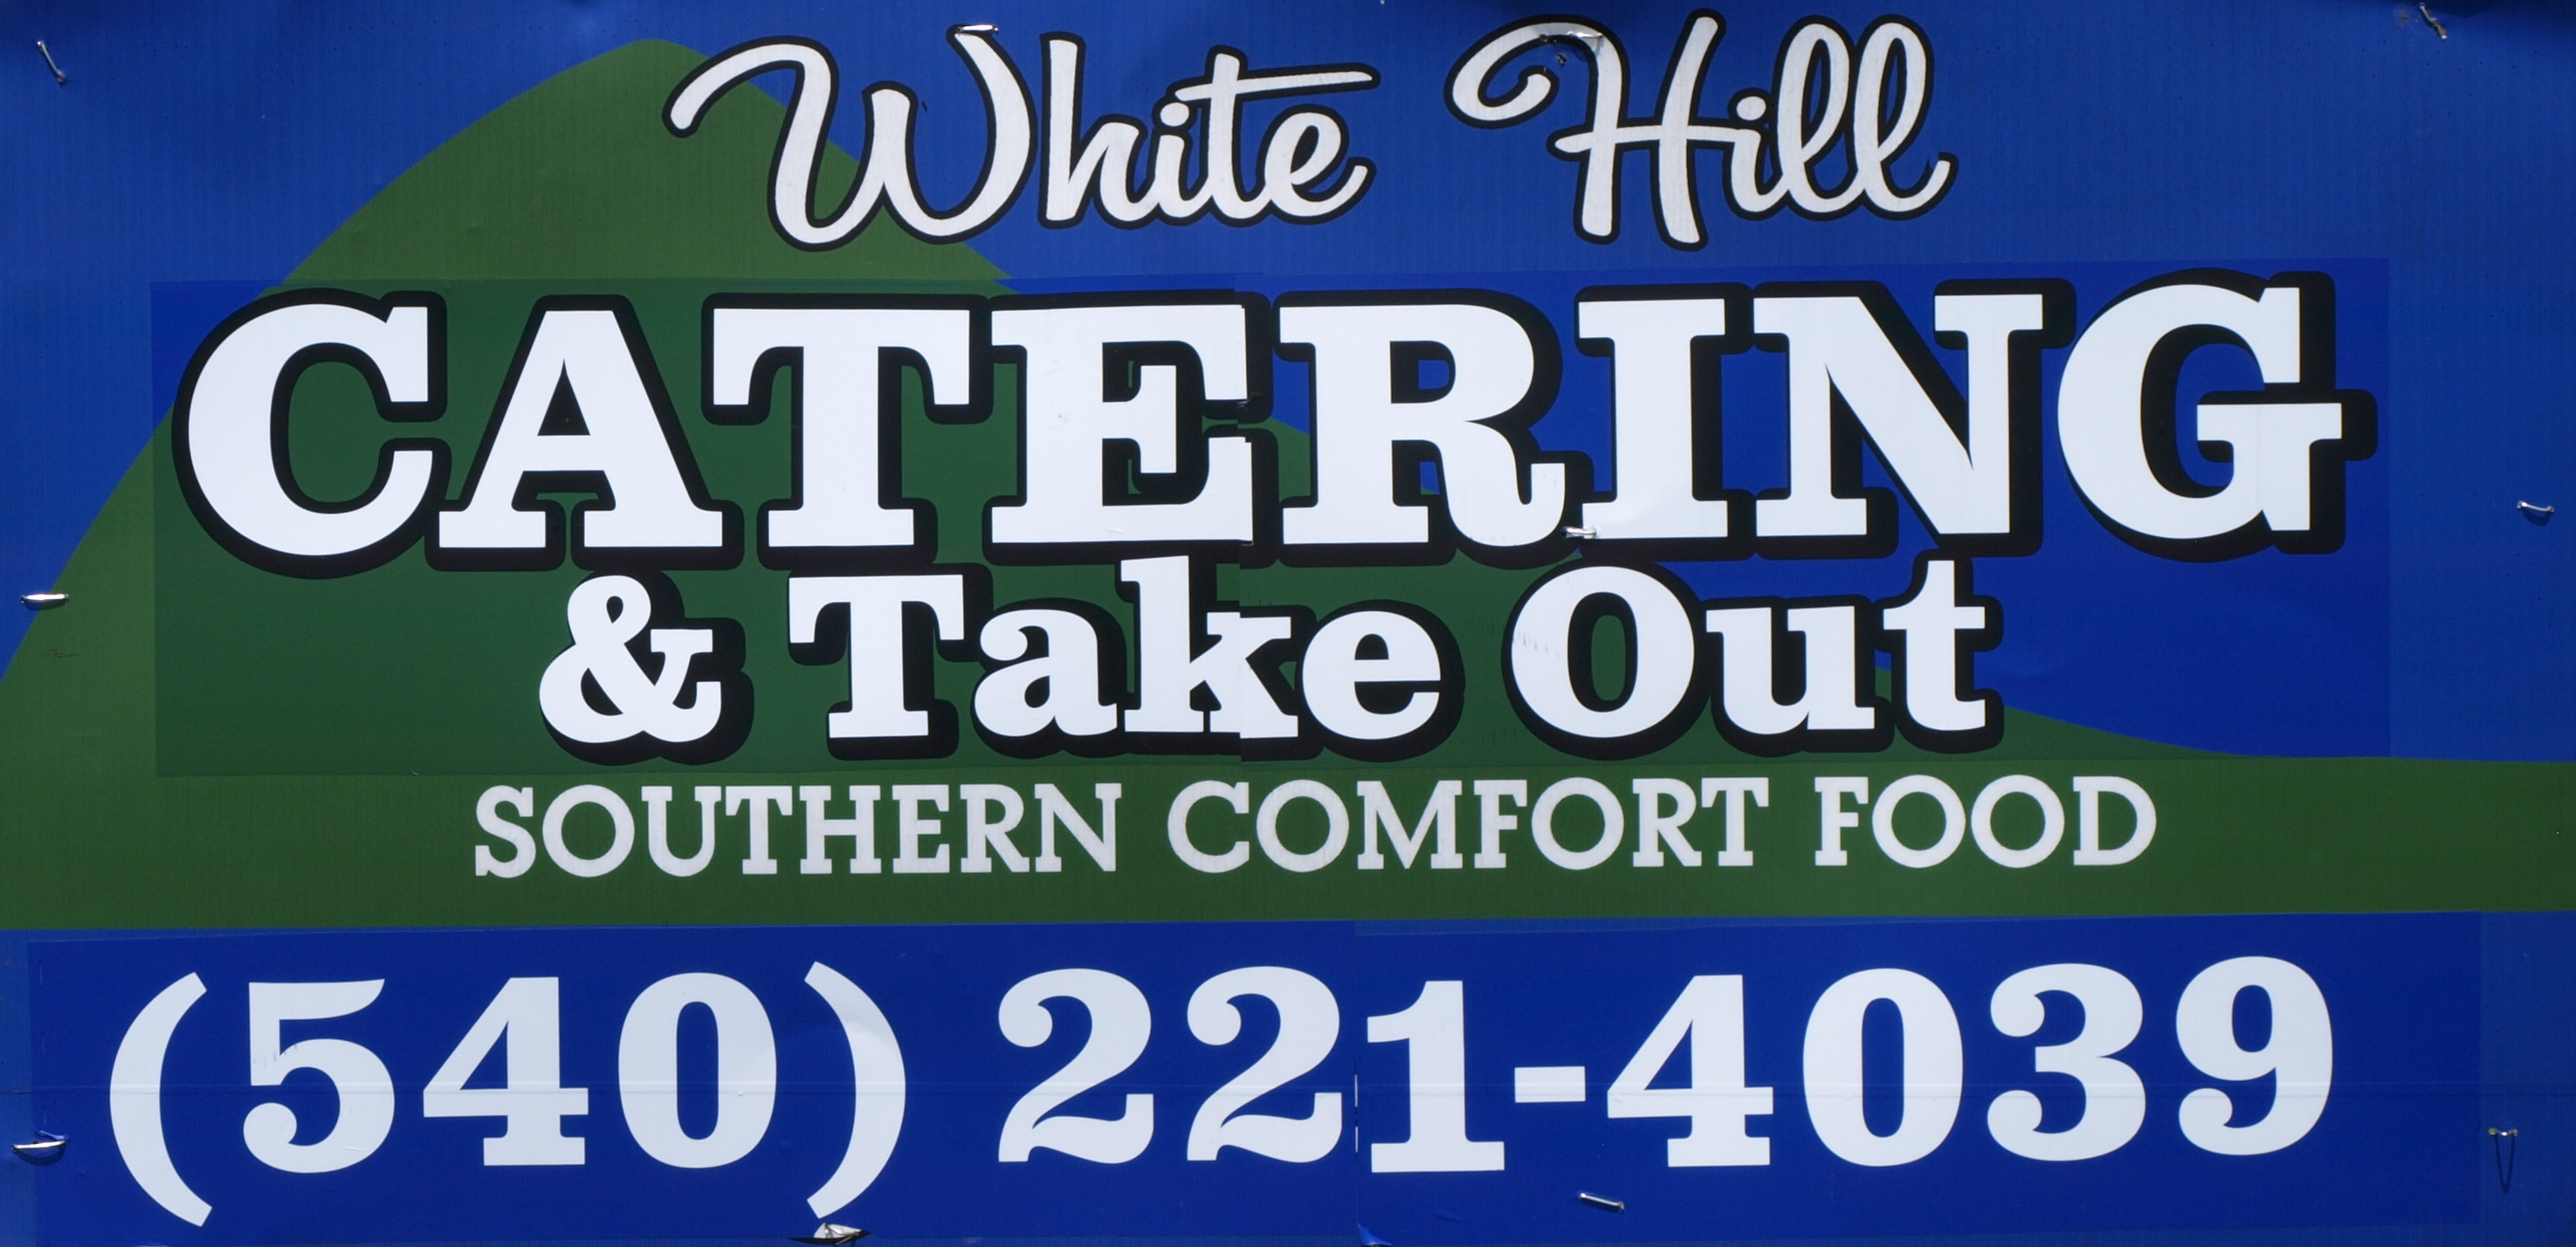 White Hill Catering